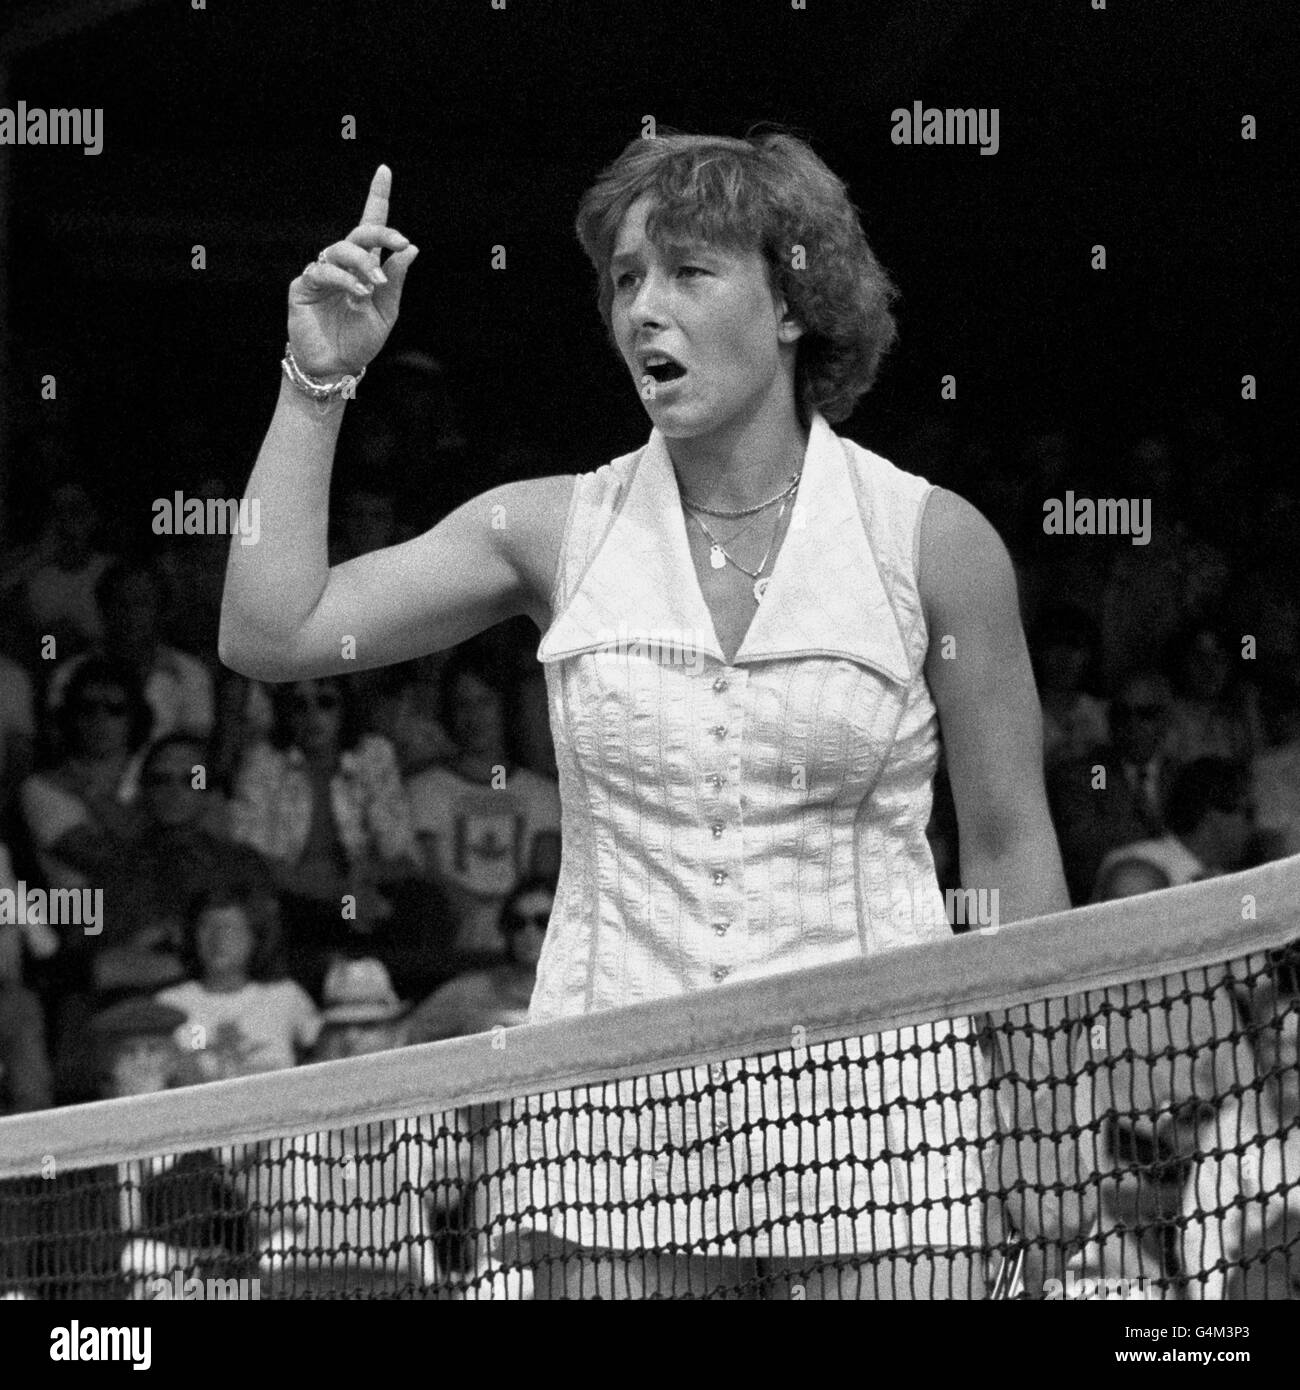 Czechoslovakia's Martina Navratilova appeals to the umpire over a line call she thought was in, during the quarter-final match against Britain's Sue Barker on Court One at Wimbledon. Miss Navratilova went on to win the match 6-3, 3-6, 7-5. Stock Photo